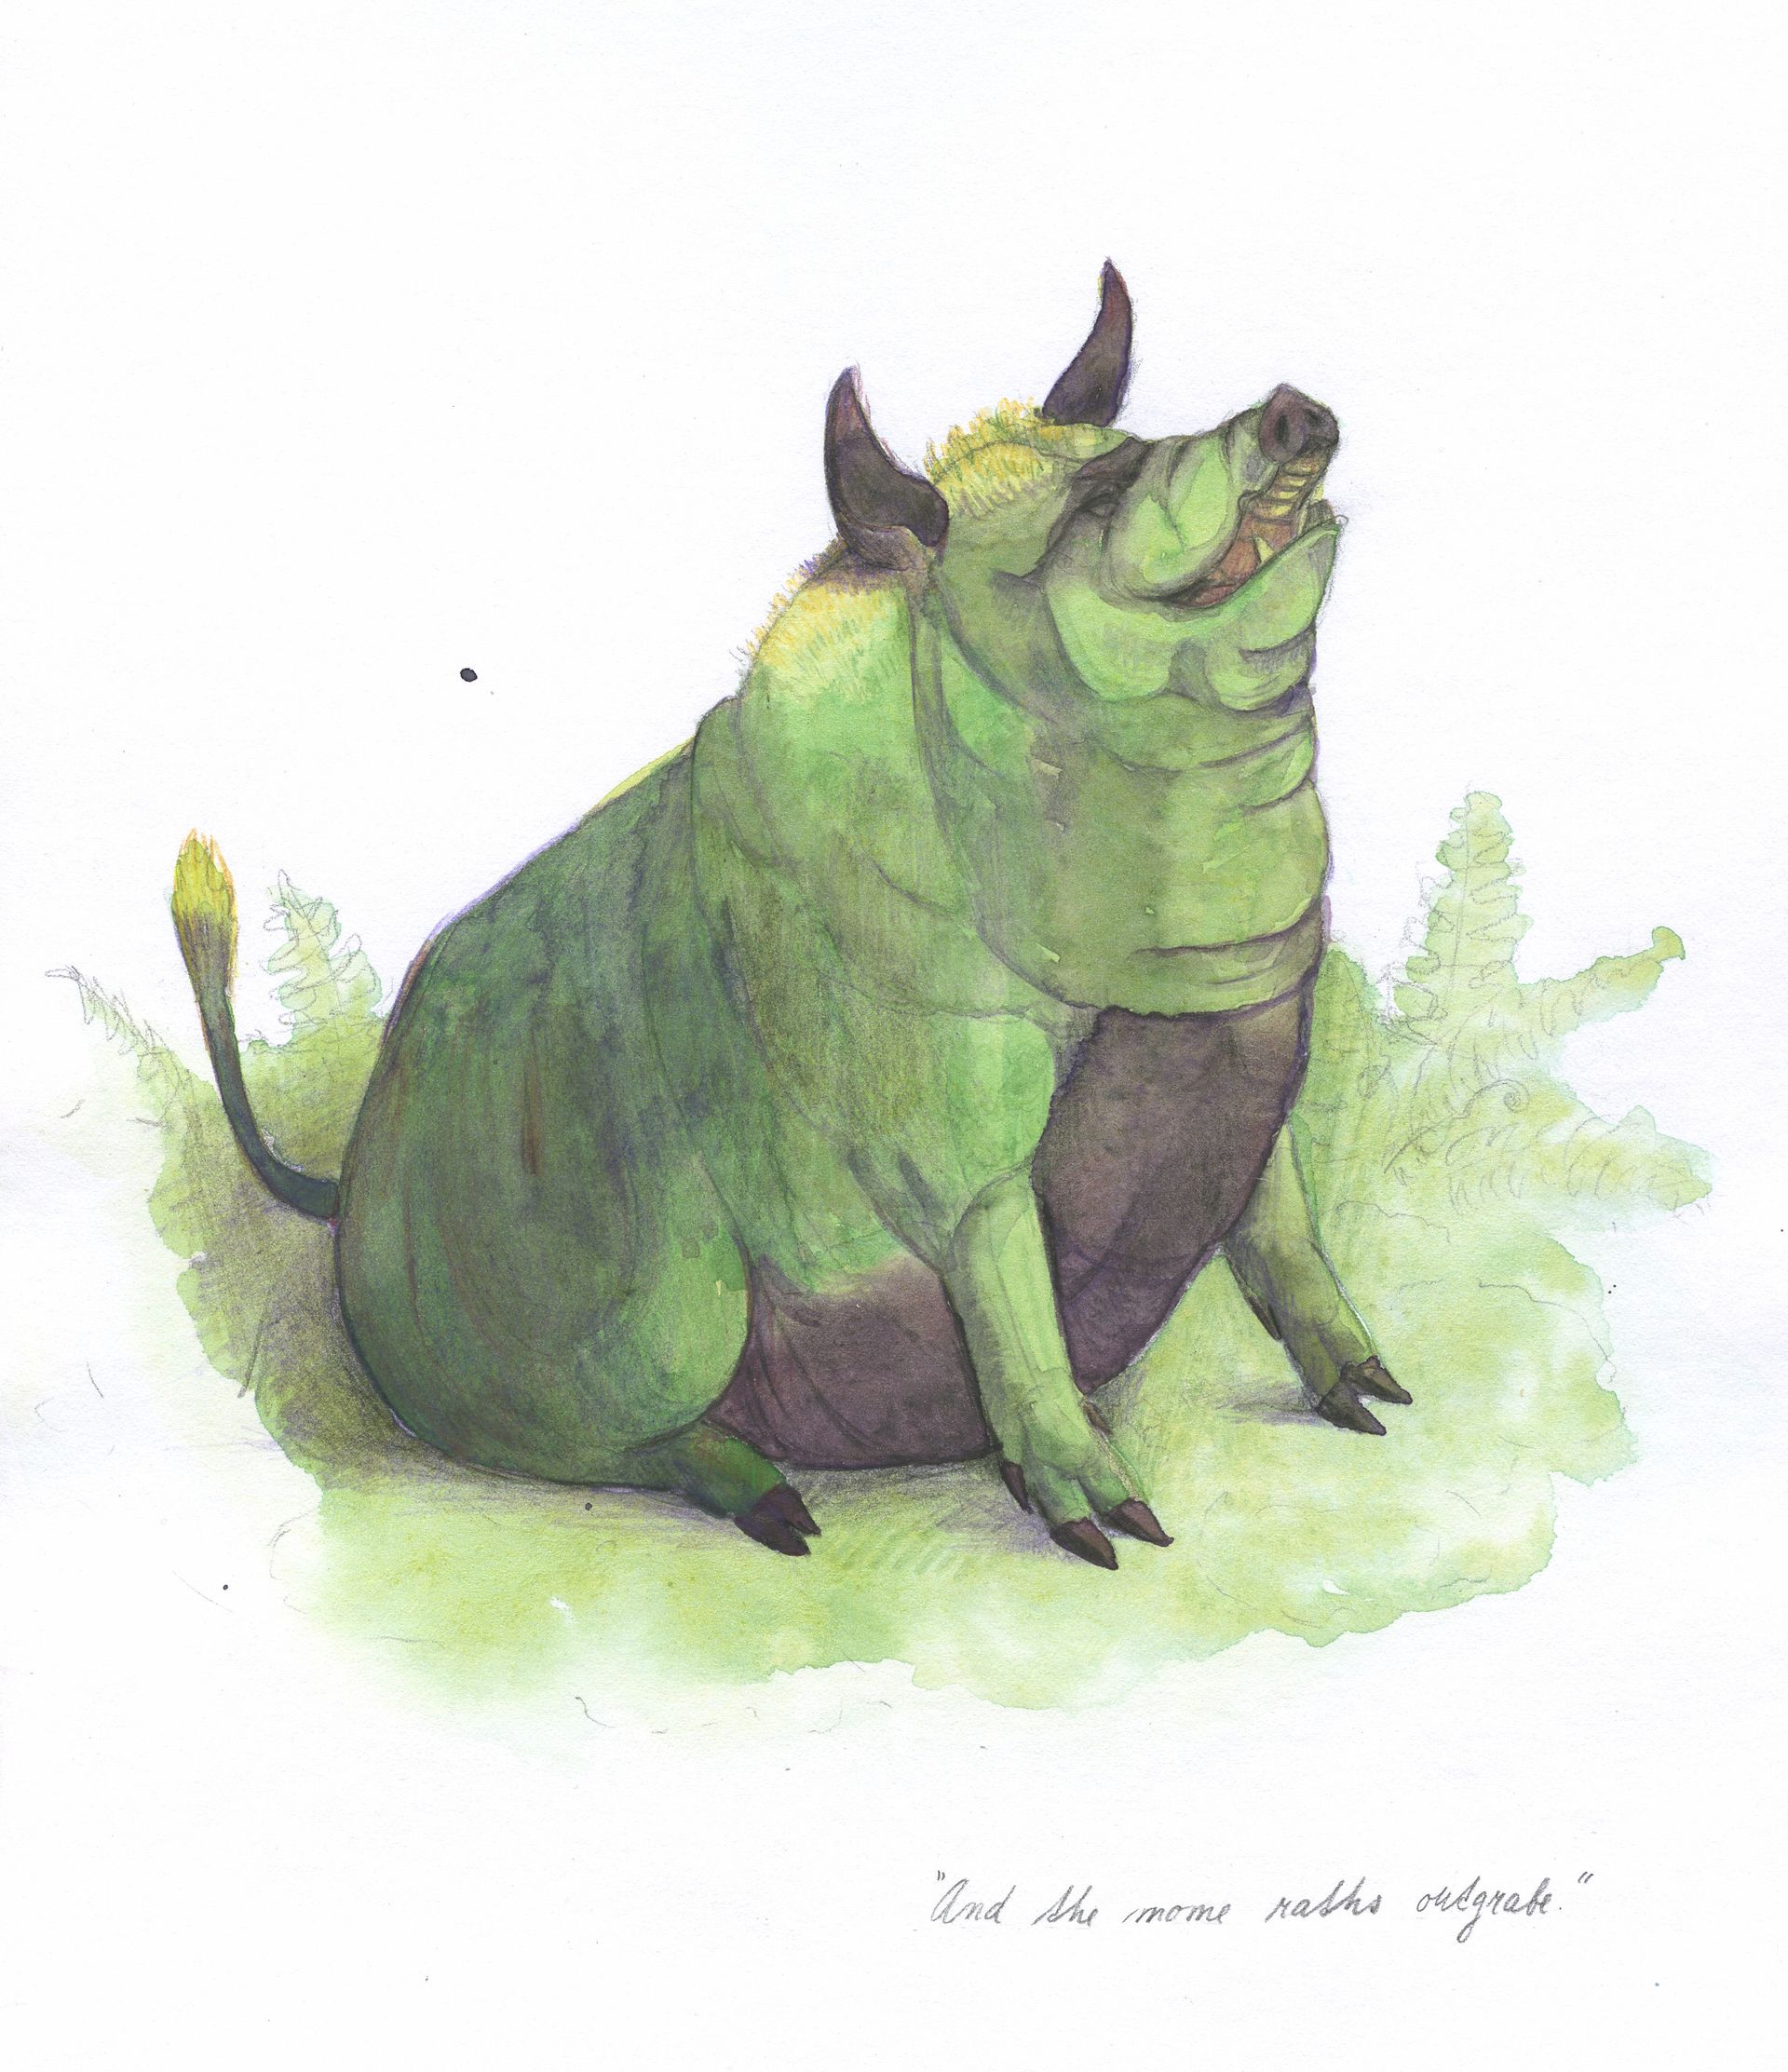 A mome rath. It looks like a very fat, green, mossy pig.